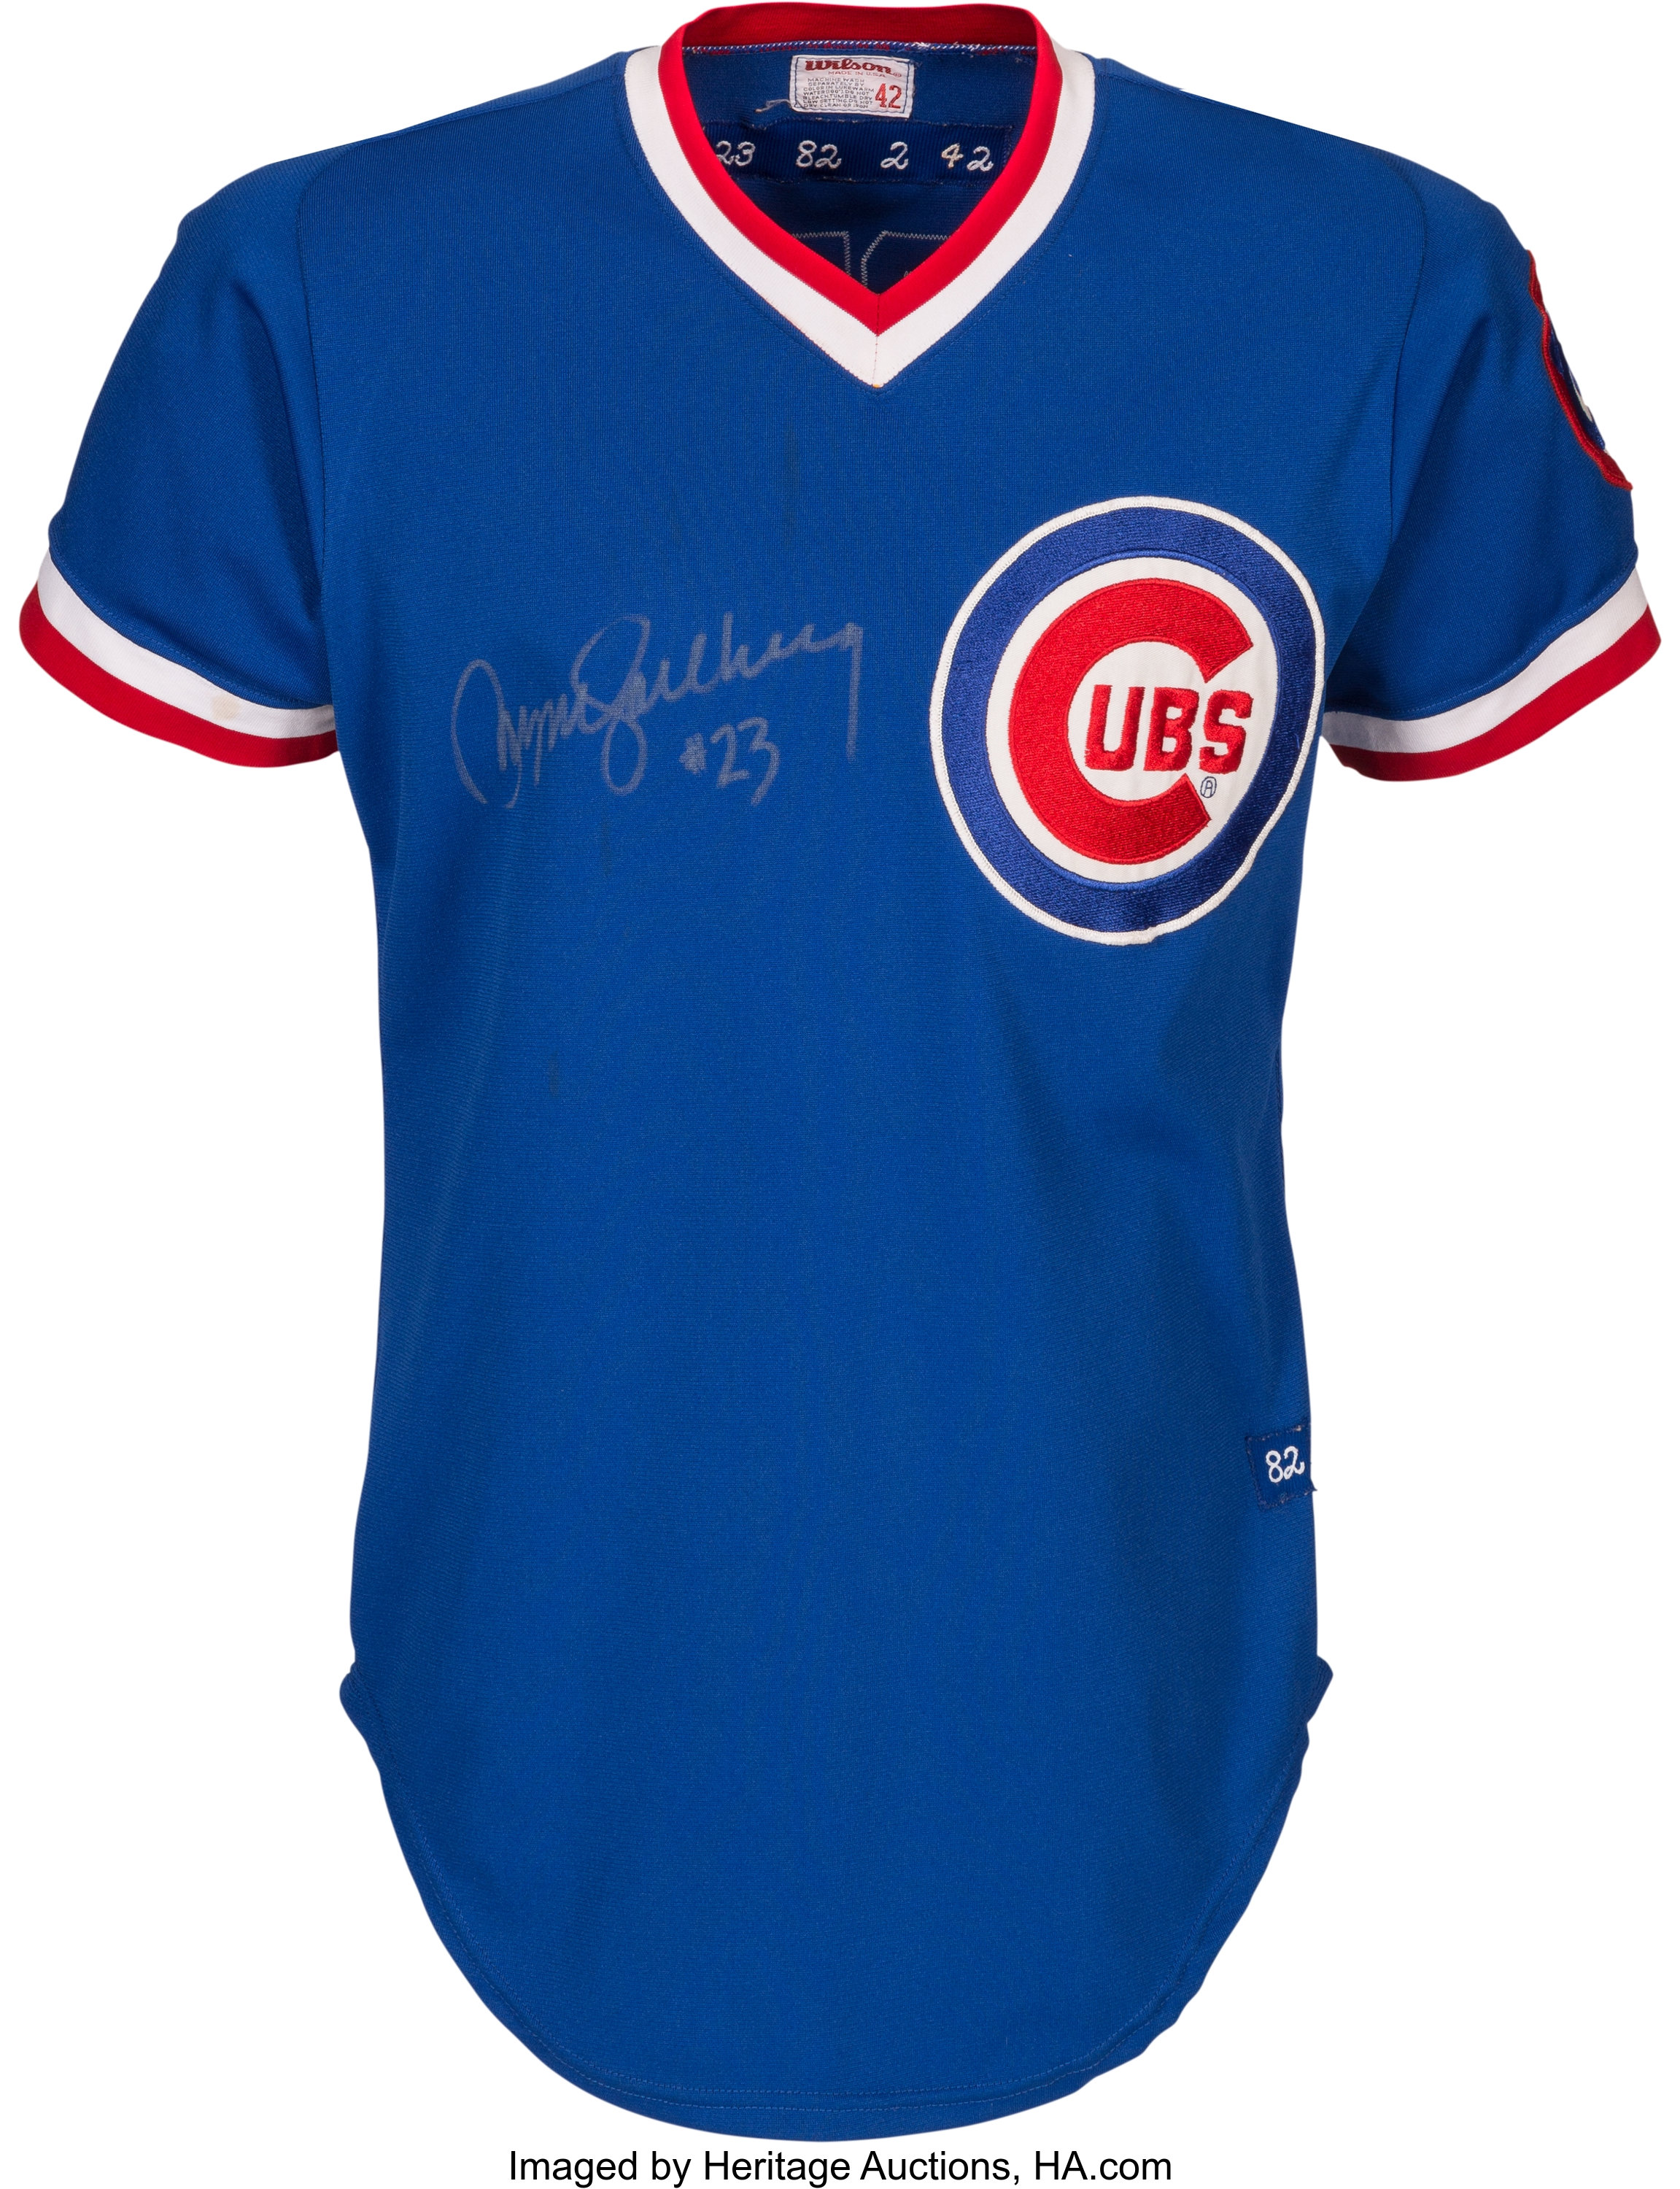 2019 Little League Classic - Game Used Jersey - Steven Squid Brault,  Chicago Cubs at Pittsburgh Pirates - 8/18/2019 (Size - 44)